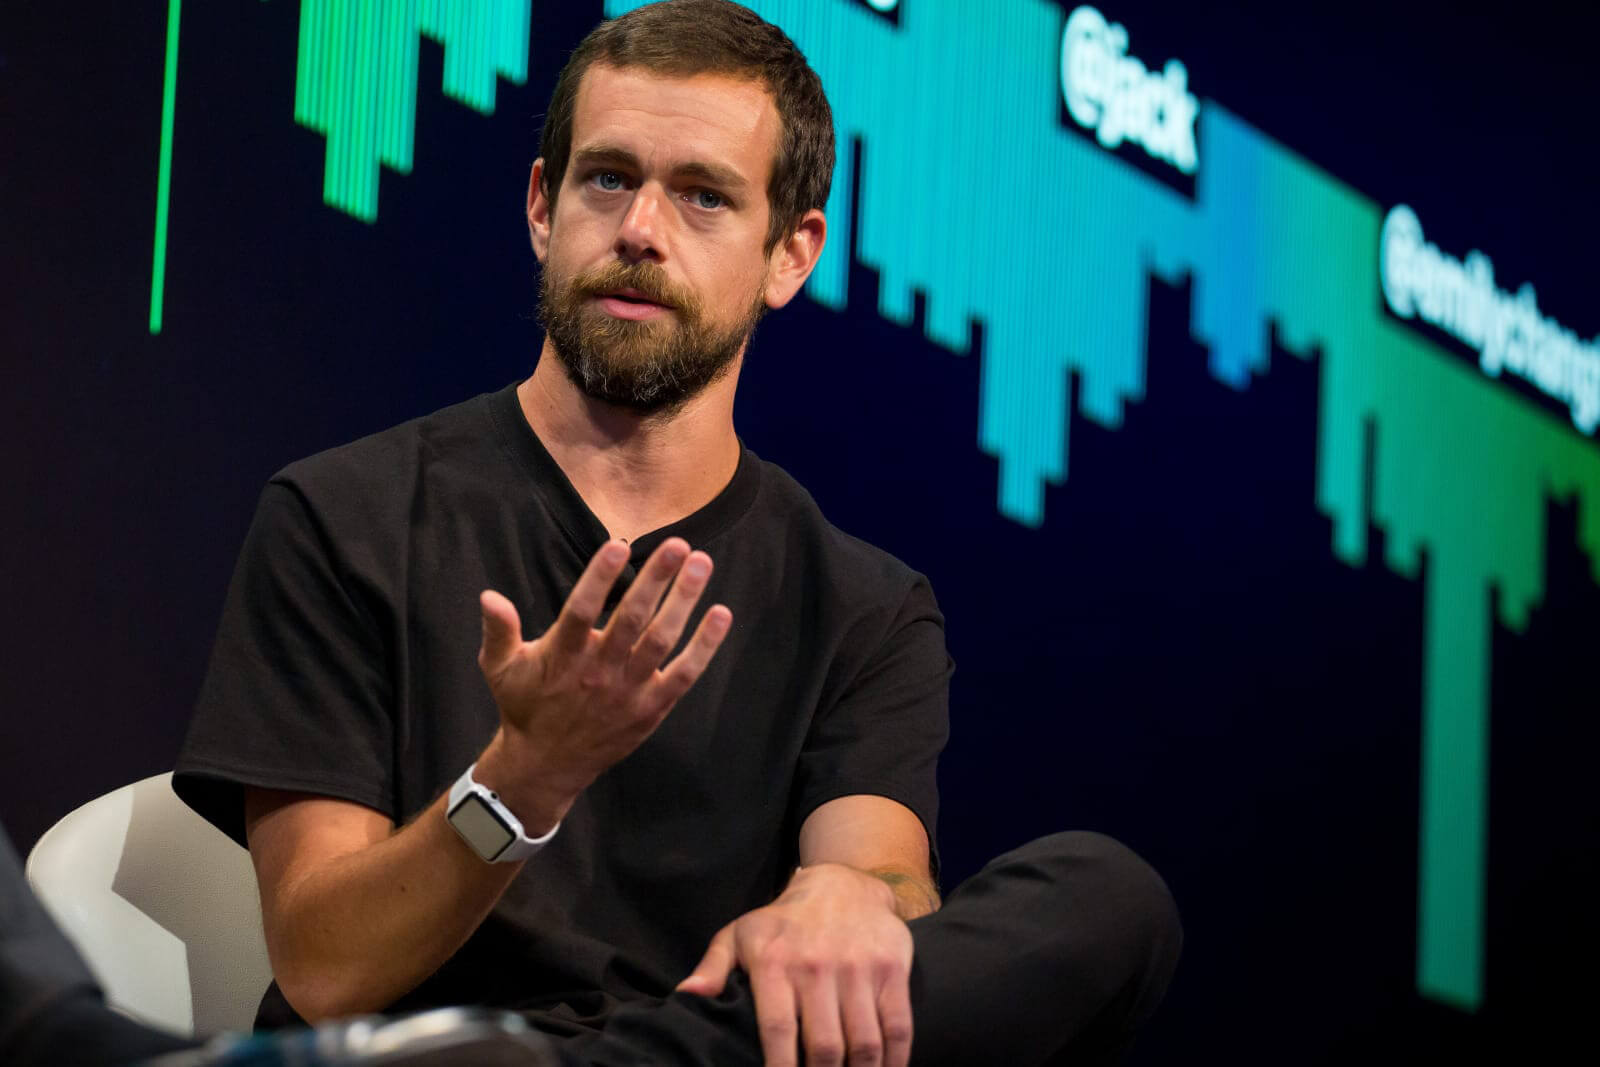 Twitter's user base is growing, but its advertising business is in trouble